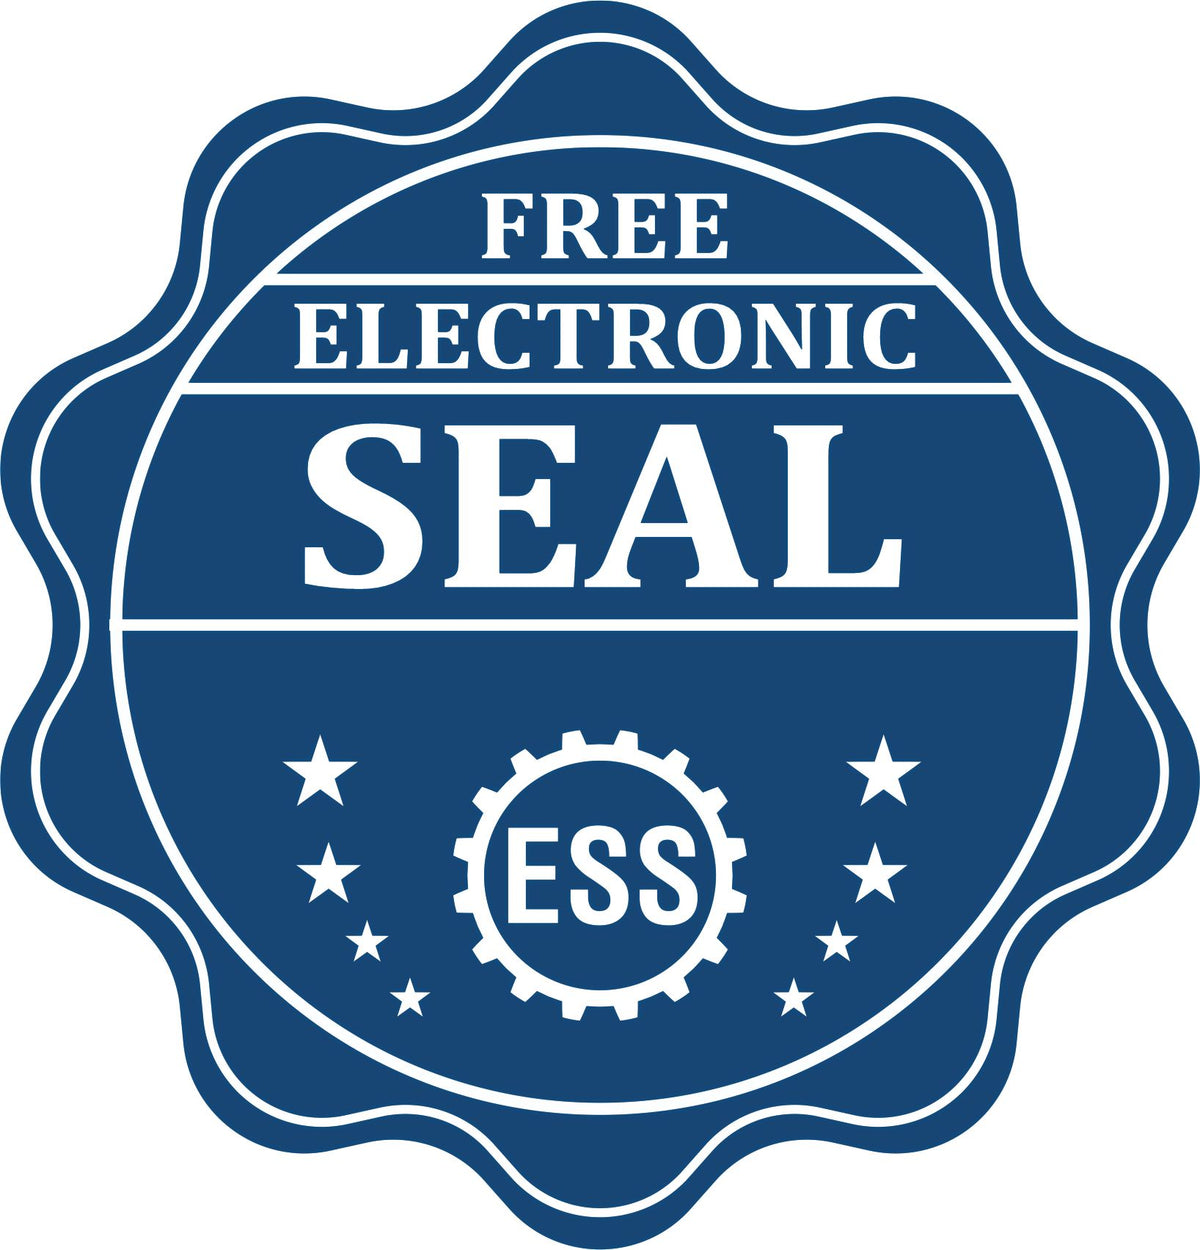 A badge showing a free electronic seal for the Soft Ohio Professional Engineer Seal with stars and the ESS gear on the emblem.